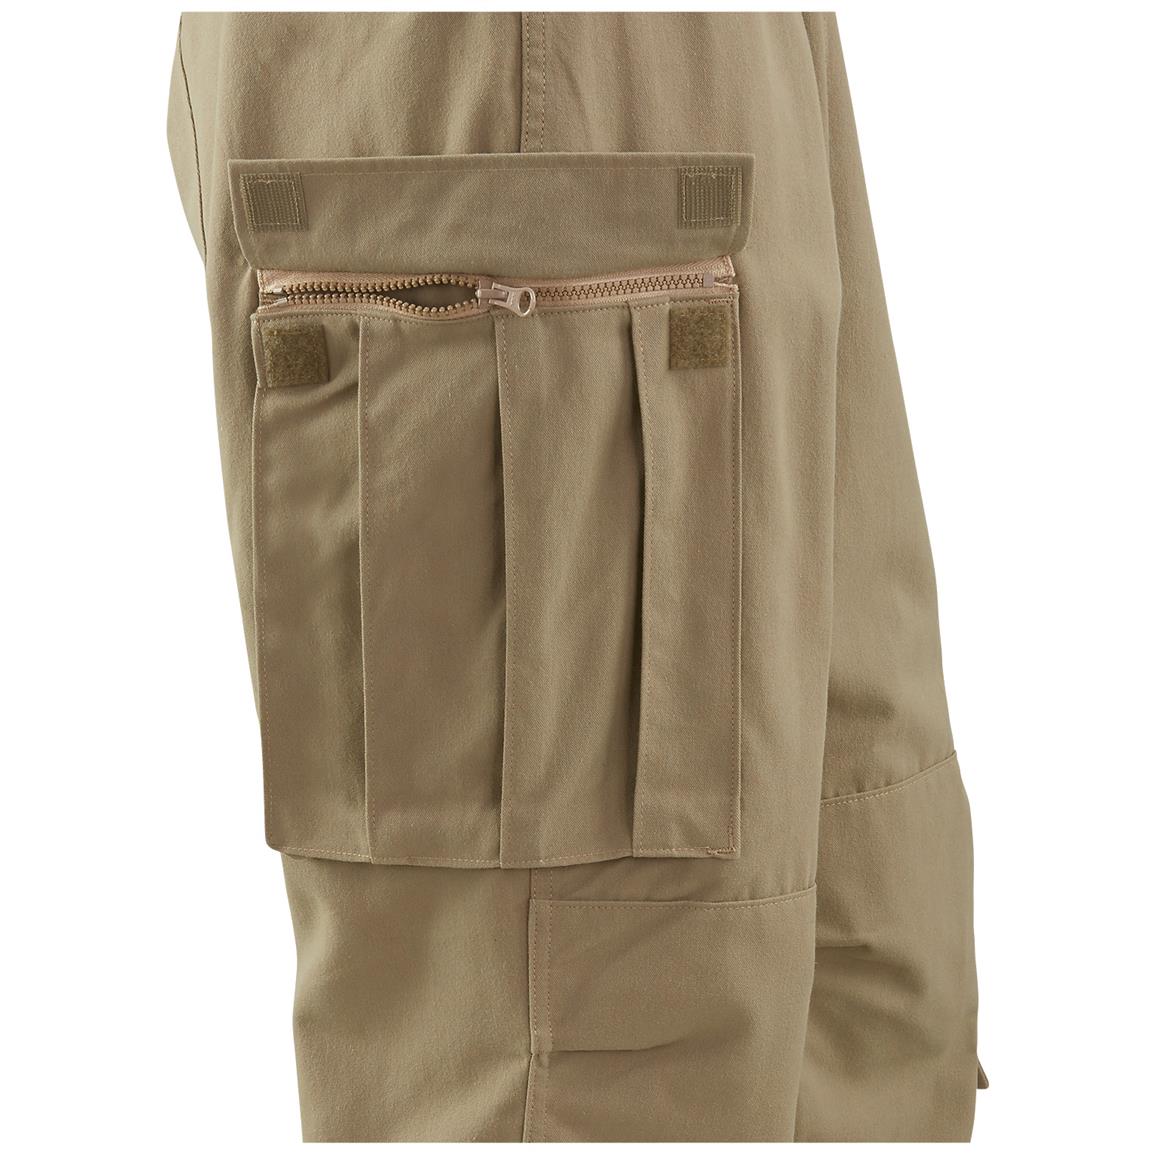 HQ ISSUE™ Military-style BDU Pants - 230721, Pants at Sportsman's Guide